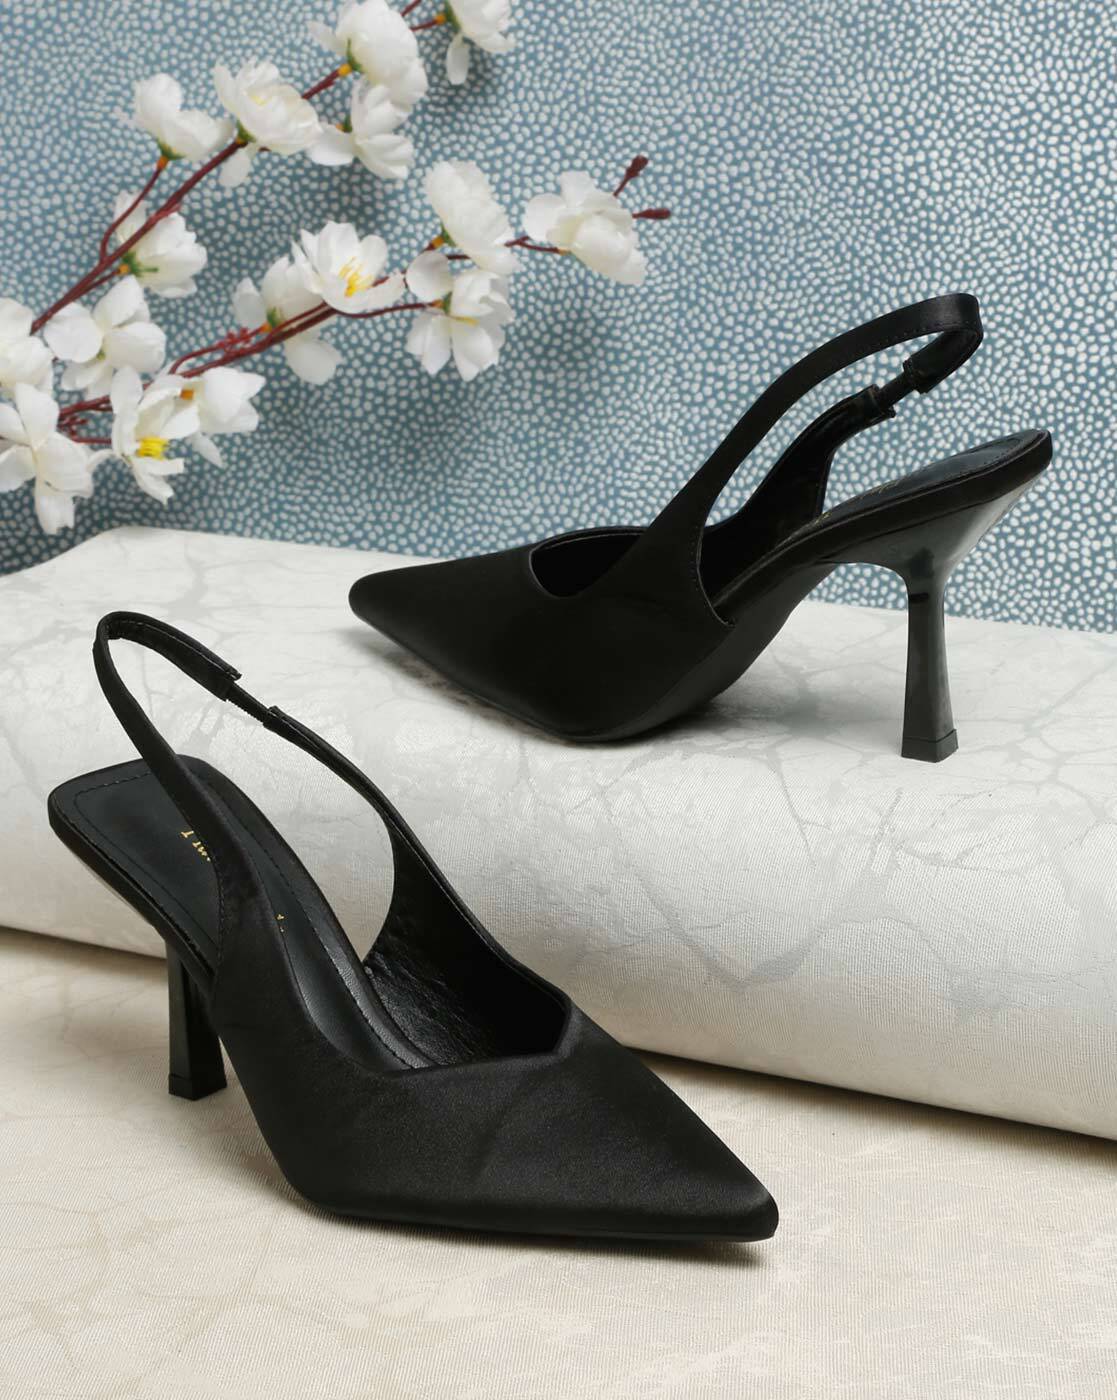 Concise Soft Leather Office Work Shoes Fashion Women's Thin High Heels  Black Pointed Toe Women Pumps Female Party Shoes B013 - Pumps - AliExpress